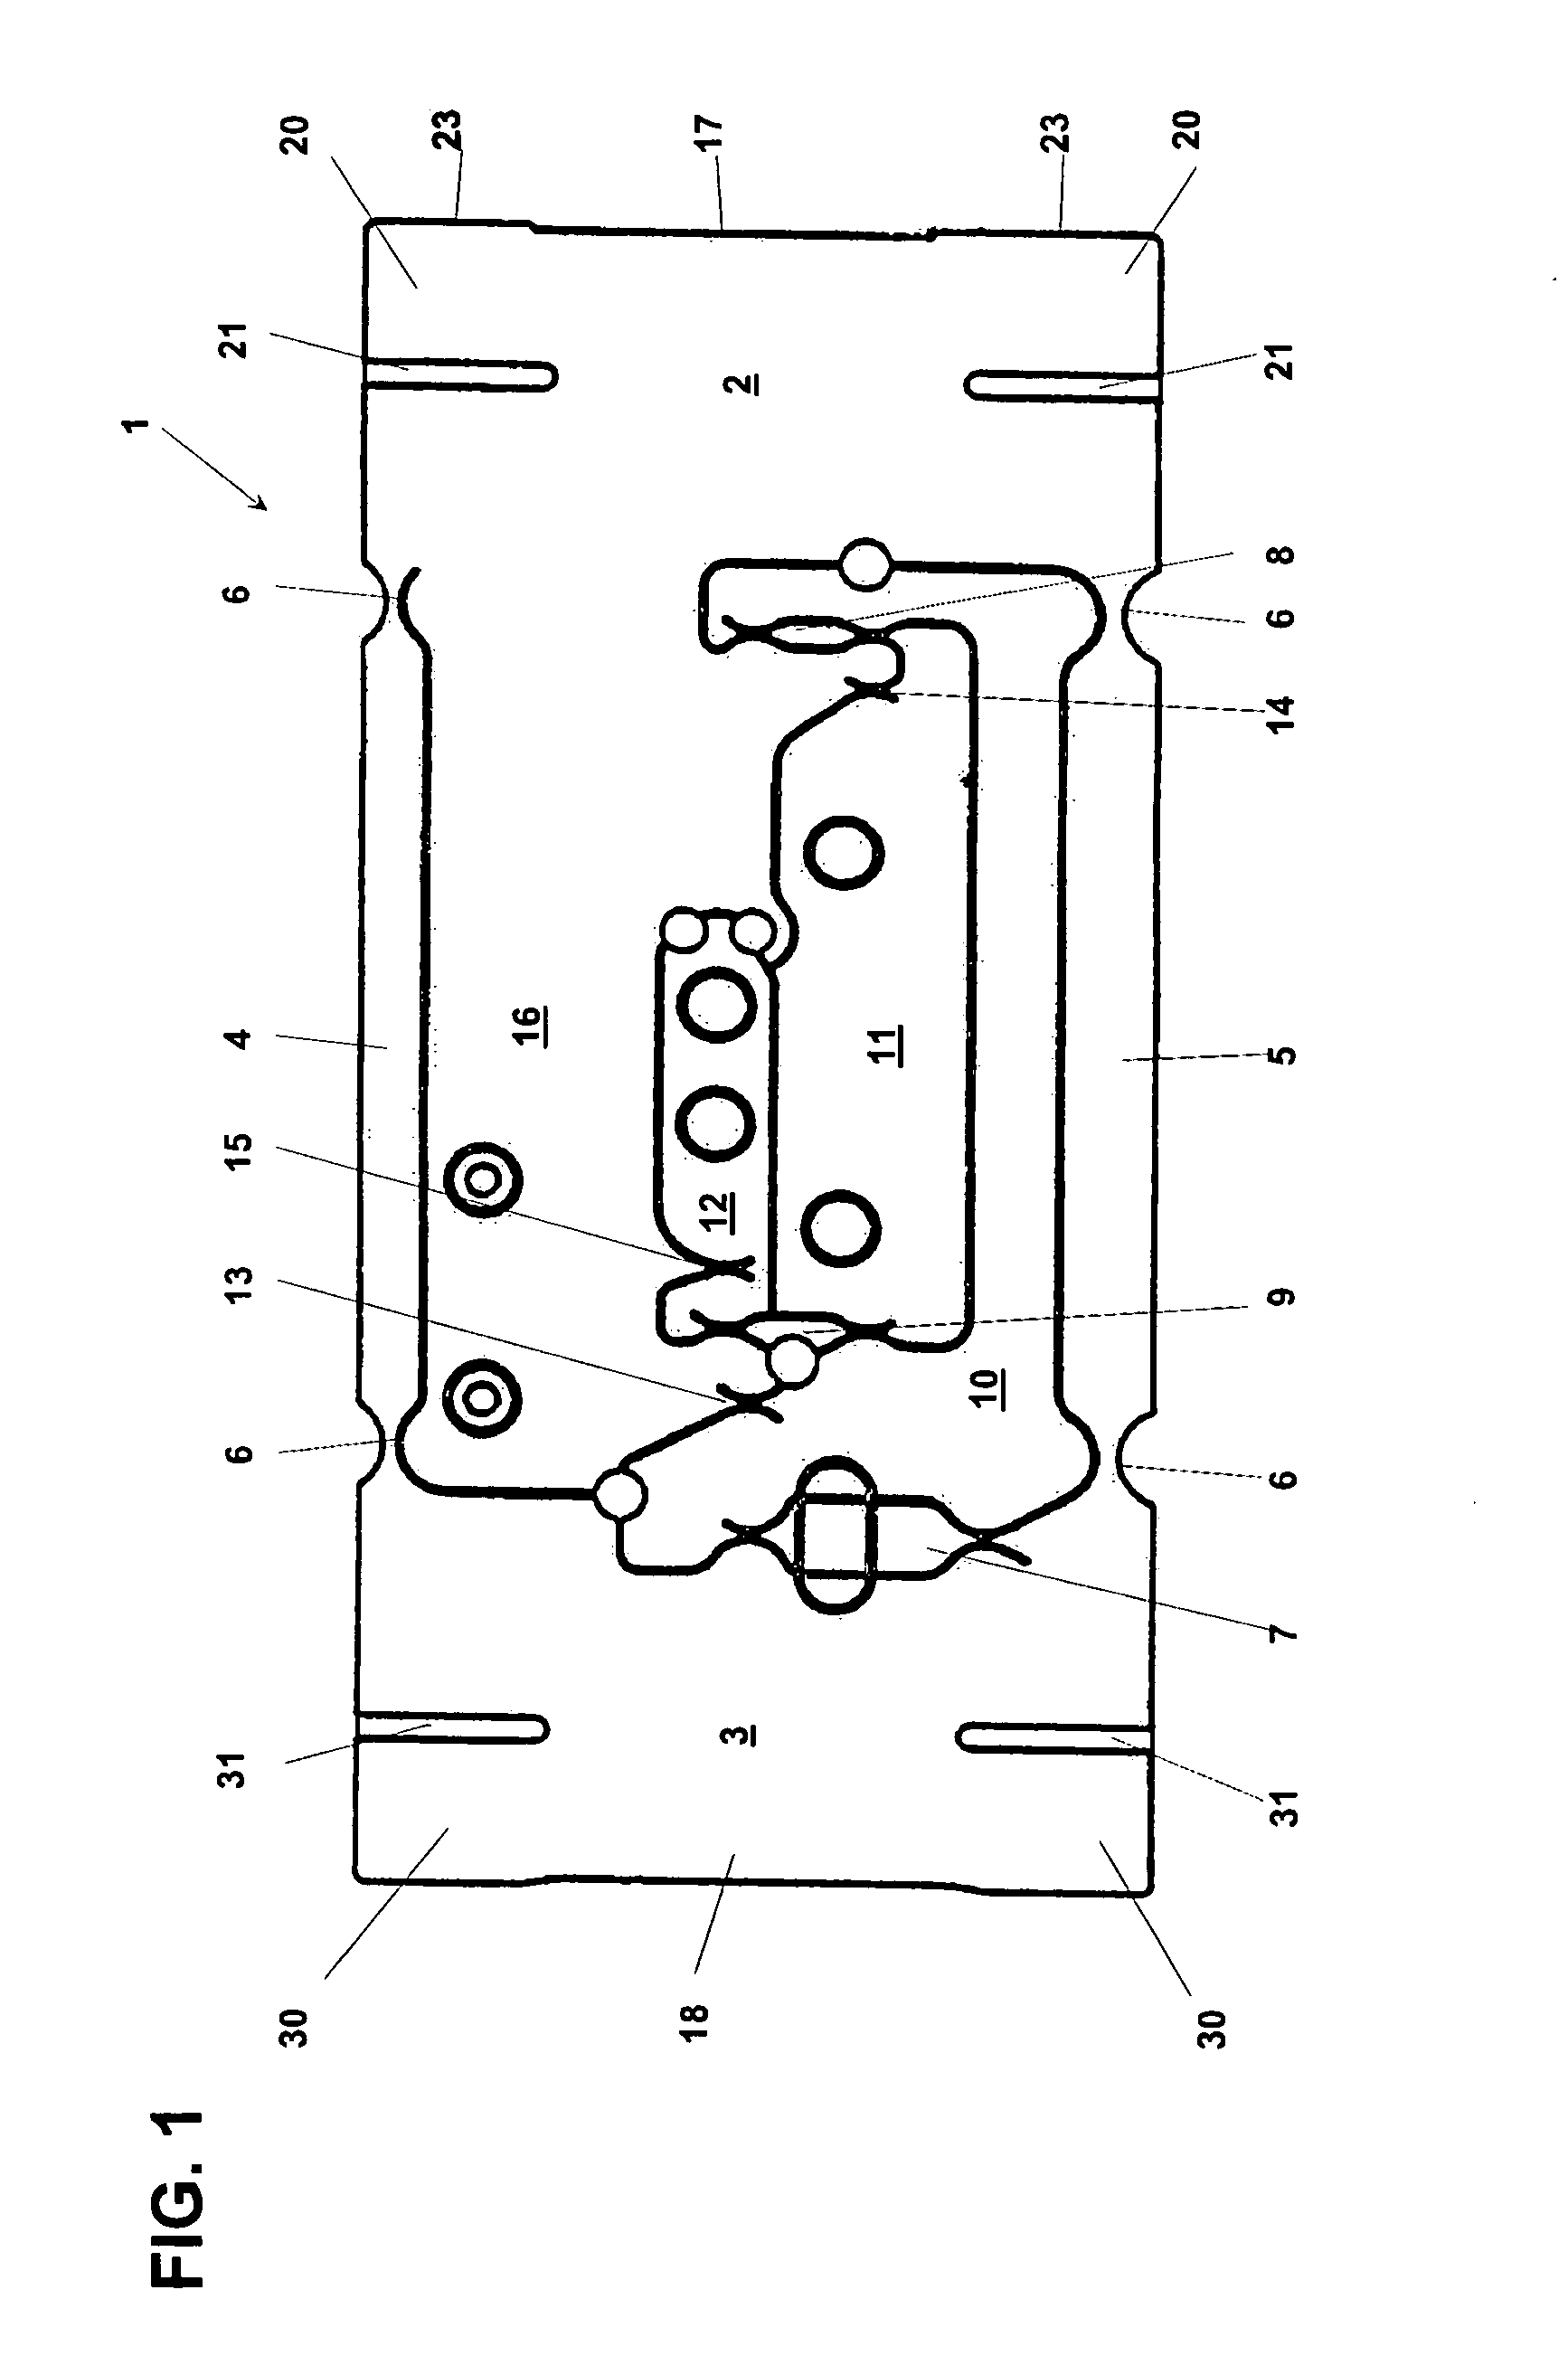 Fastening arrangement of a force-transmitting device